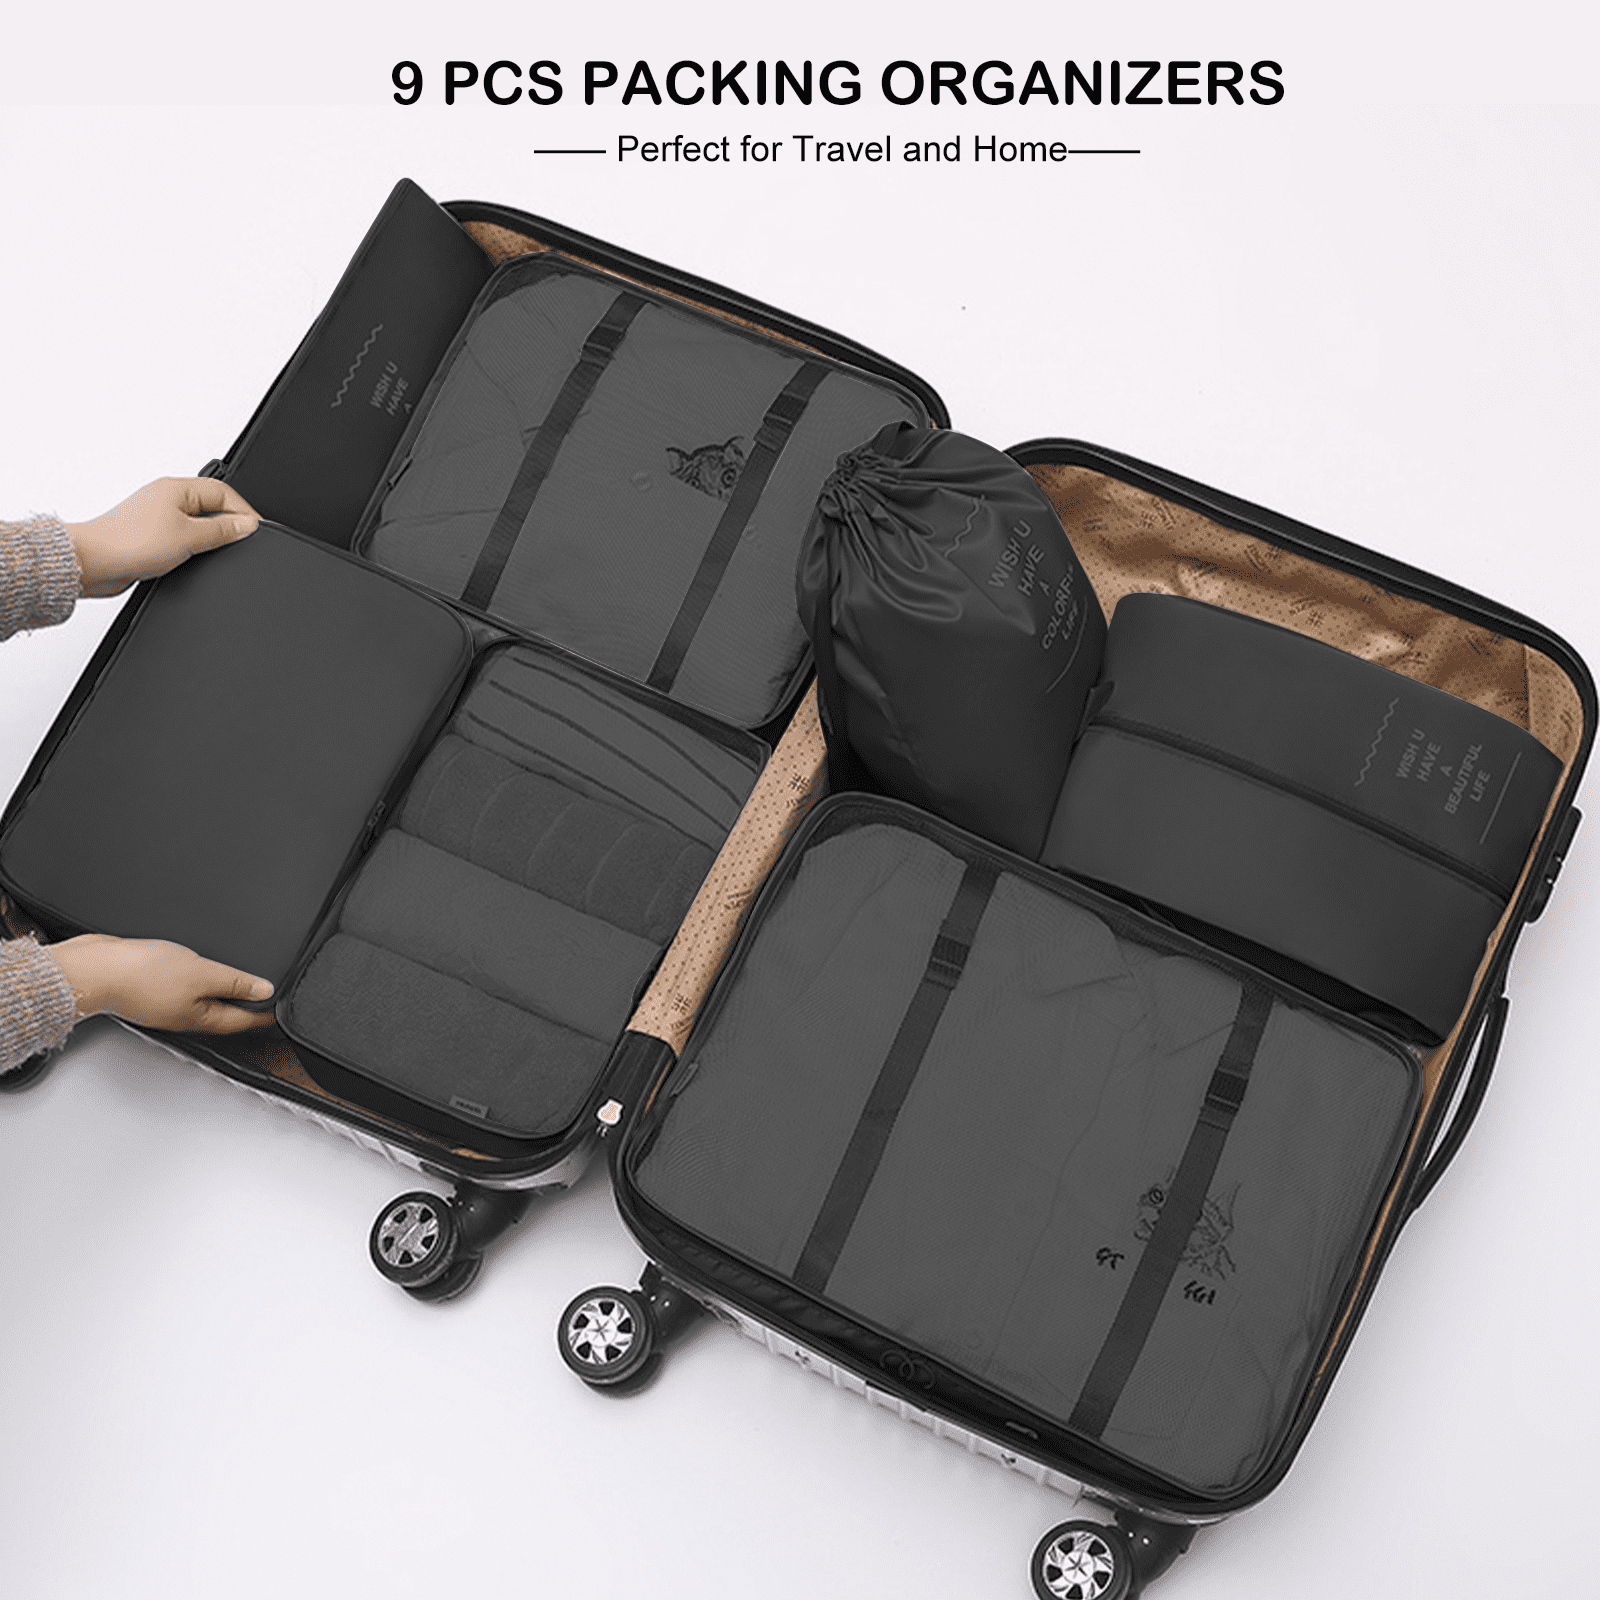 Yamyone 9 PCS Packing Cubes for Travel,Travel Packing Cubes Lightweight Suitcase  Organizer Bags Set Luggage Packing Organizers for Travel Accessories with Shoes  Bags - Grey 